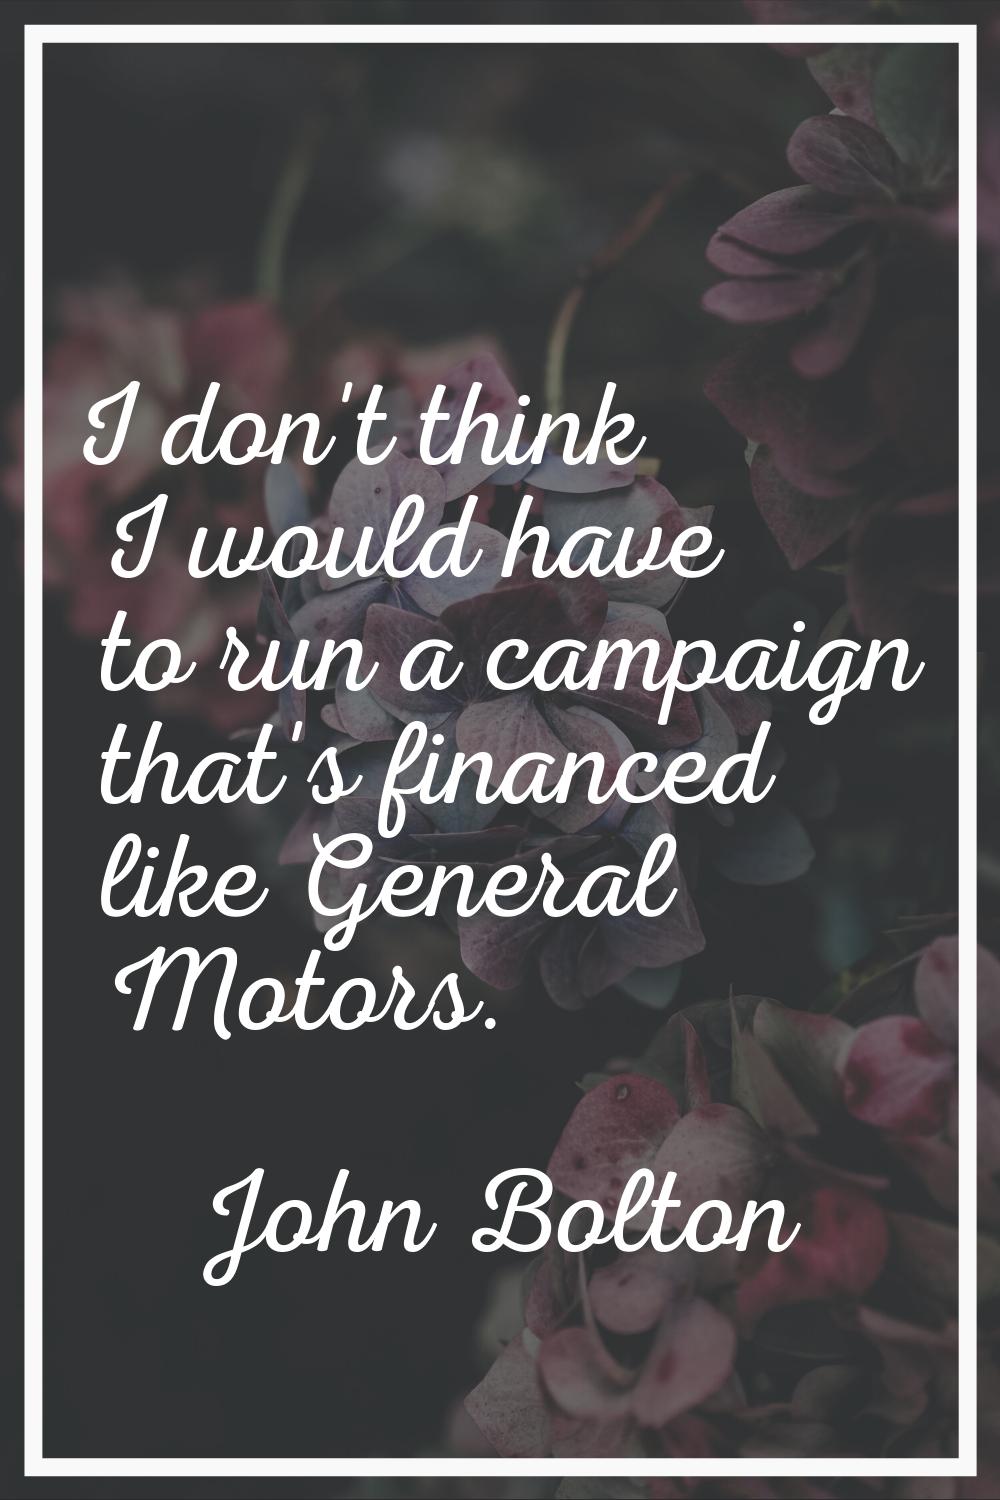 I don't think I would have to run a campaign that's financed like General Motors.